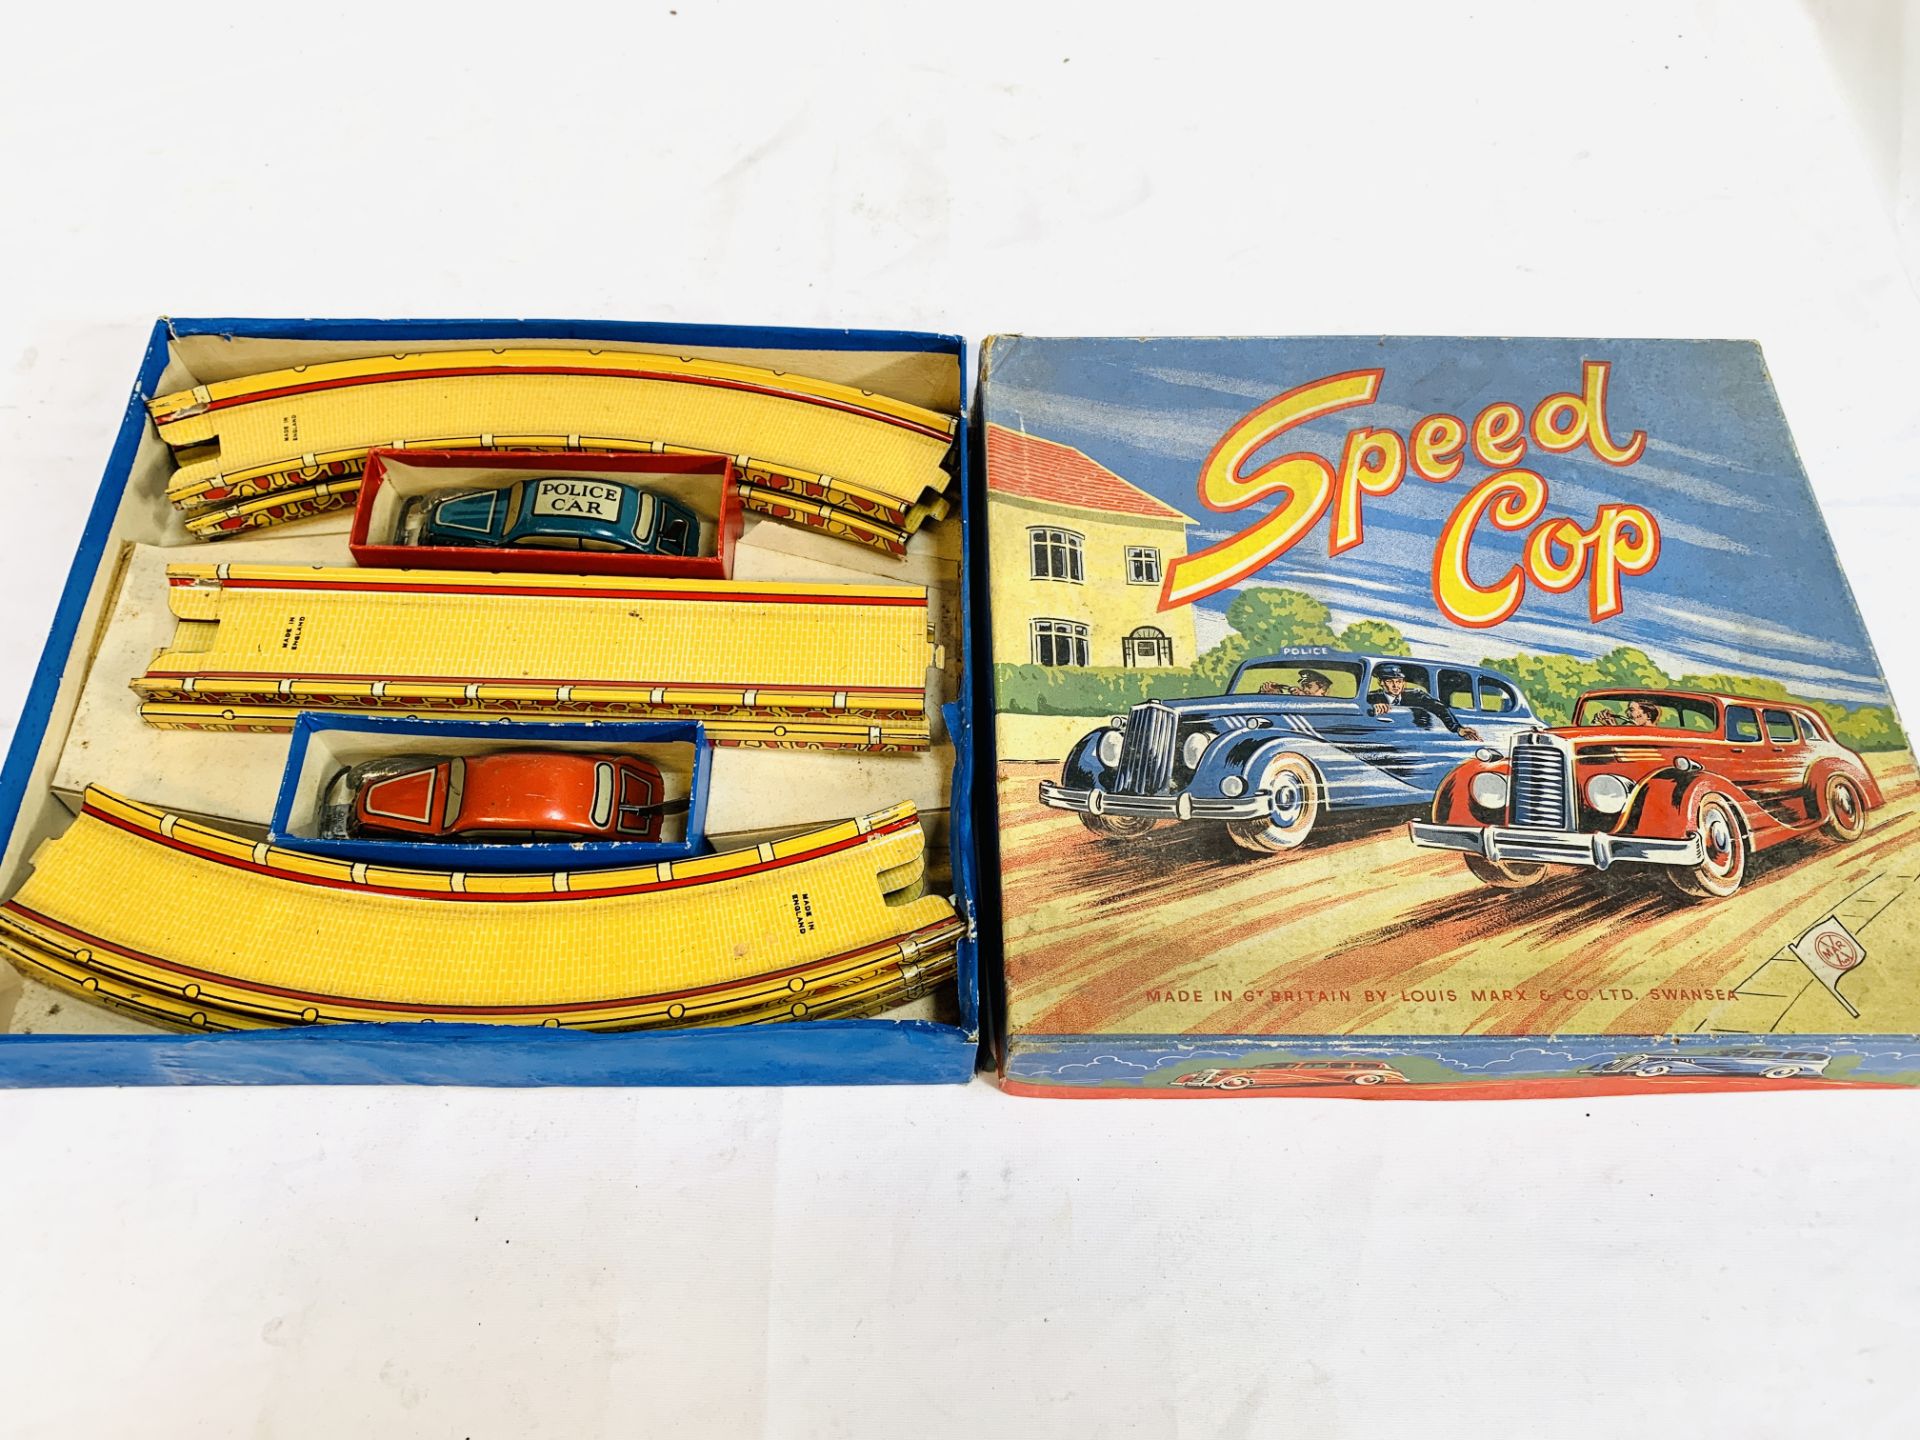 Louis Marx and Co "Speed Cop" no. 434 - Image 3 of 4